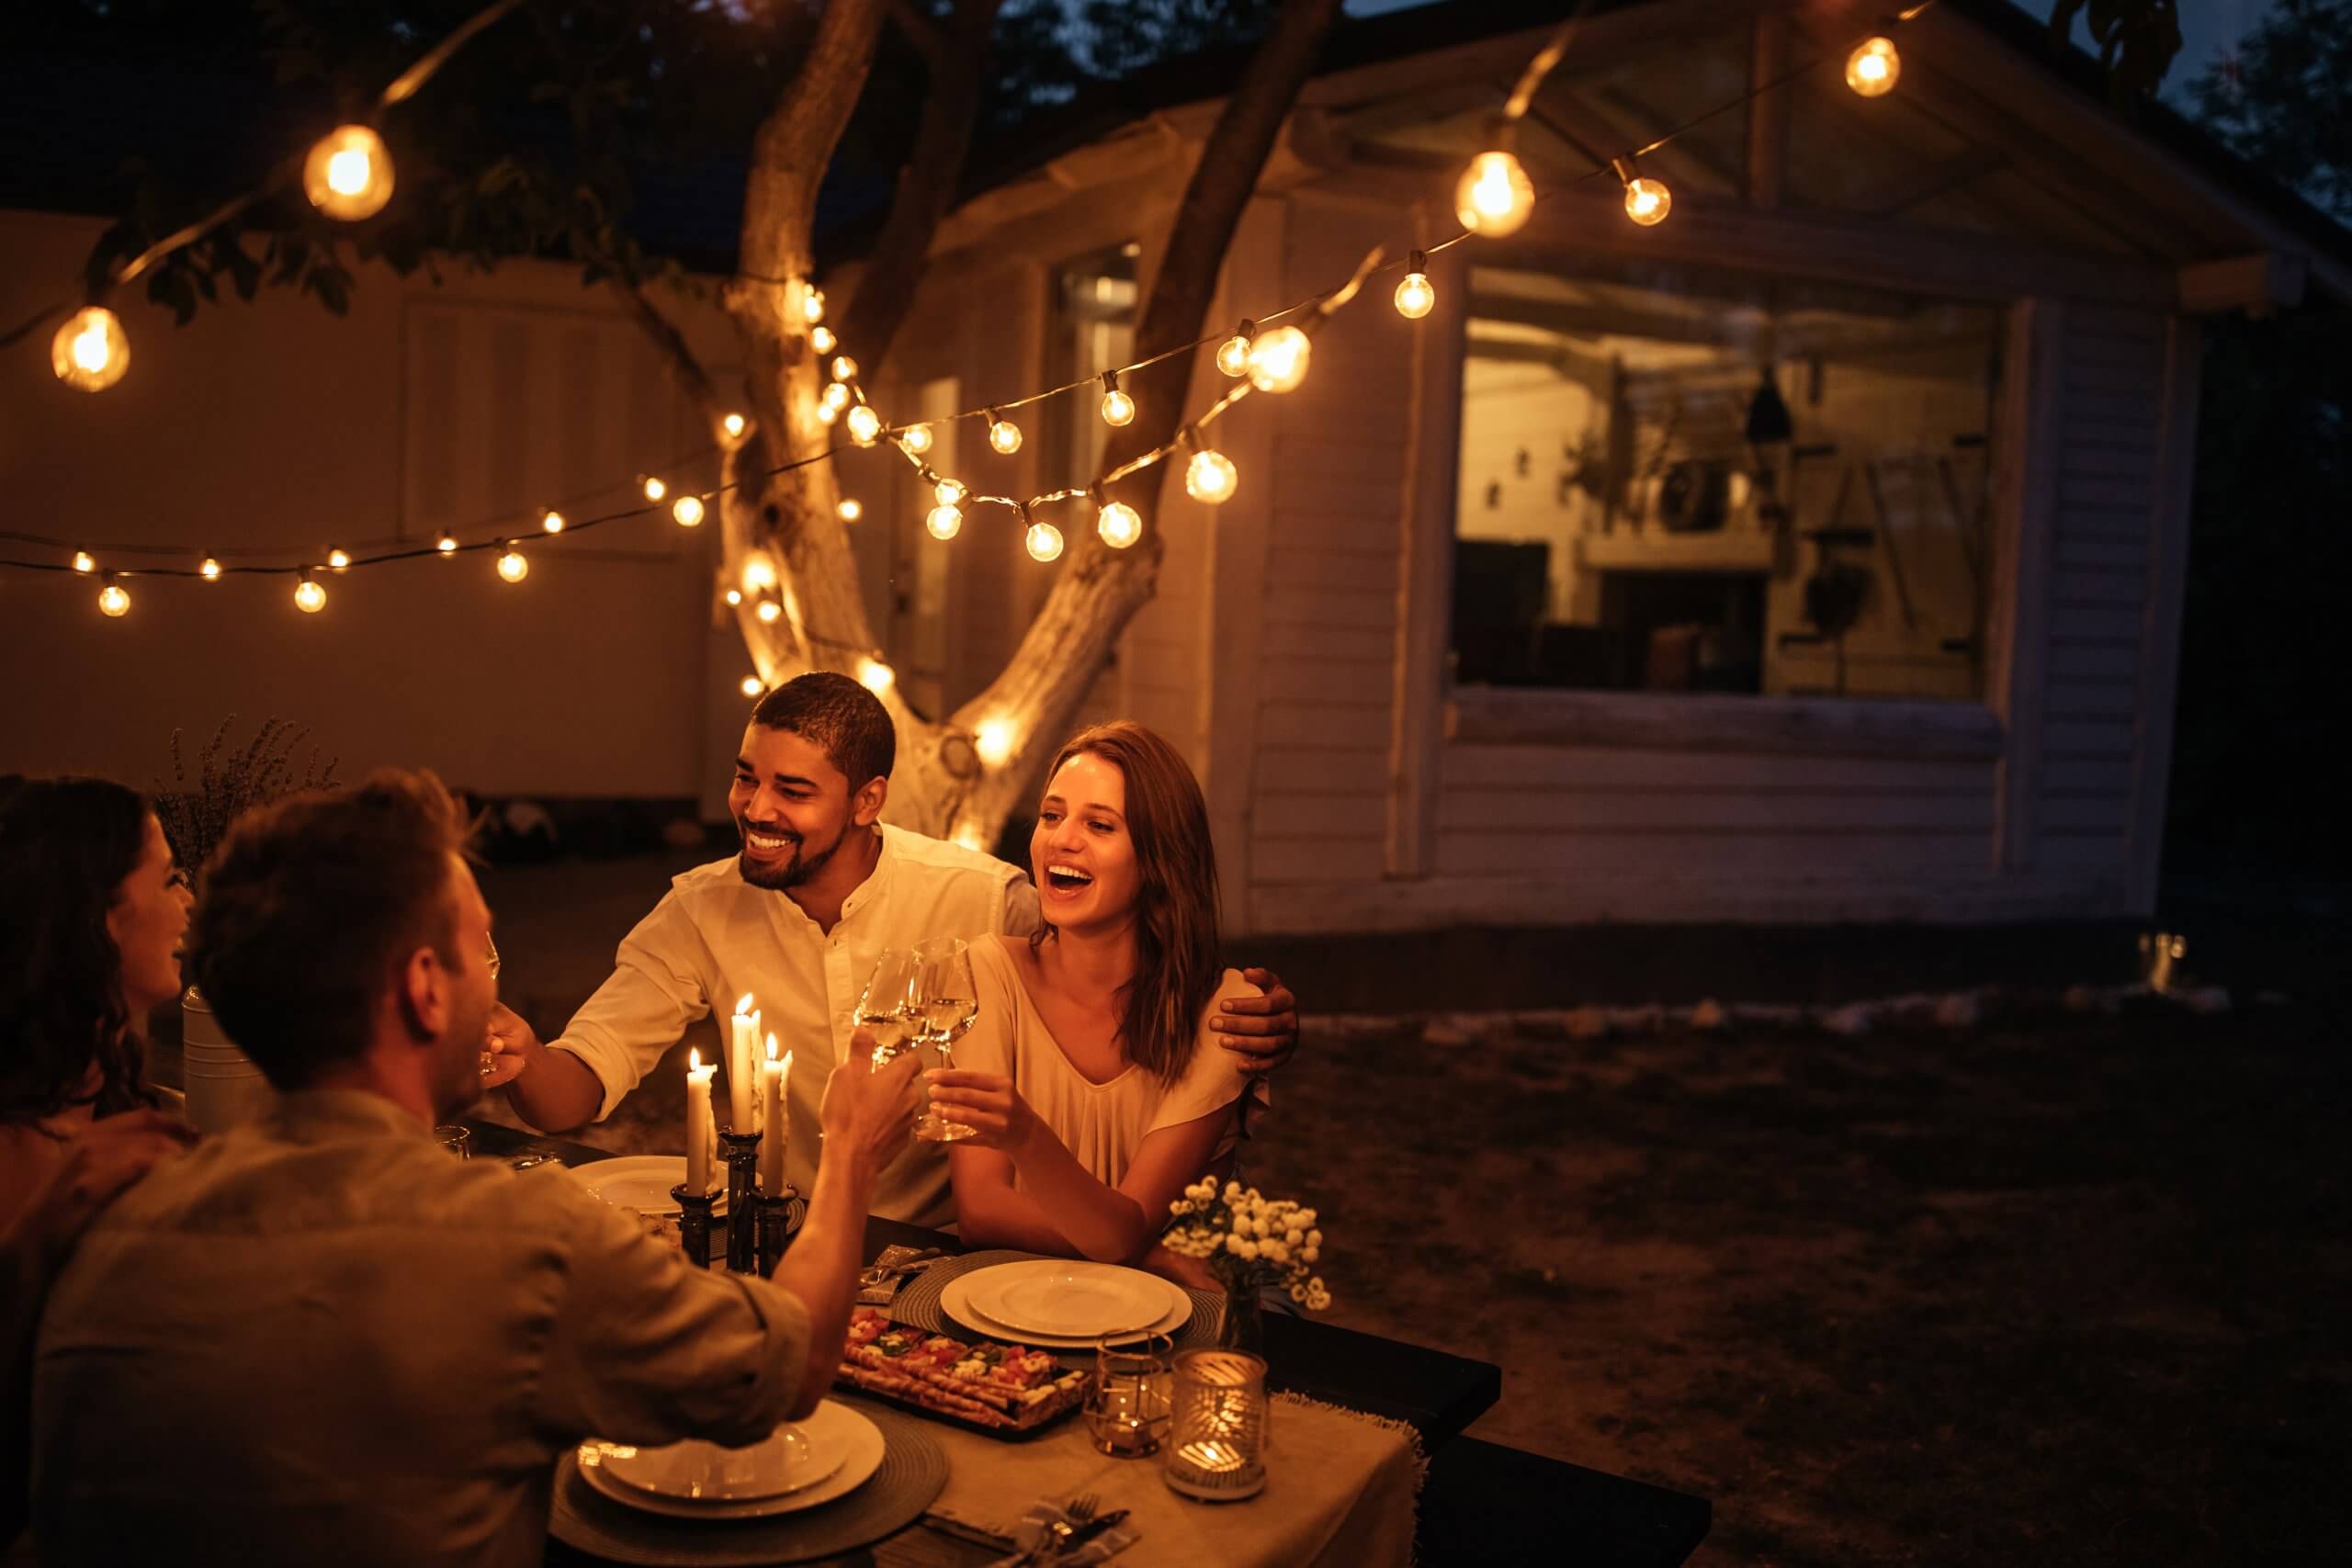 Adults celebrating at table in backyard, home behind them